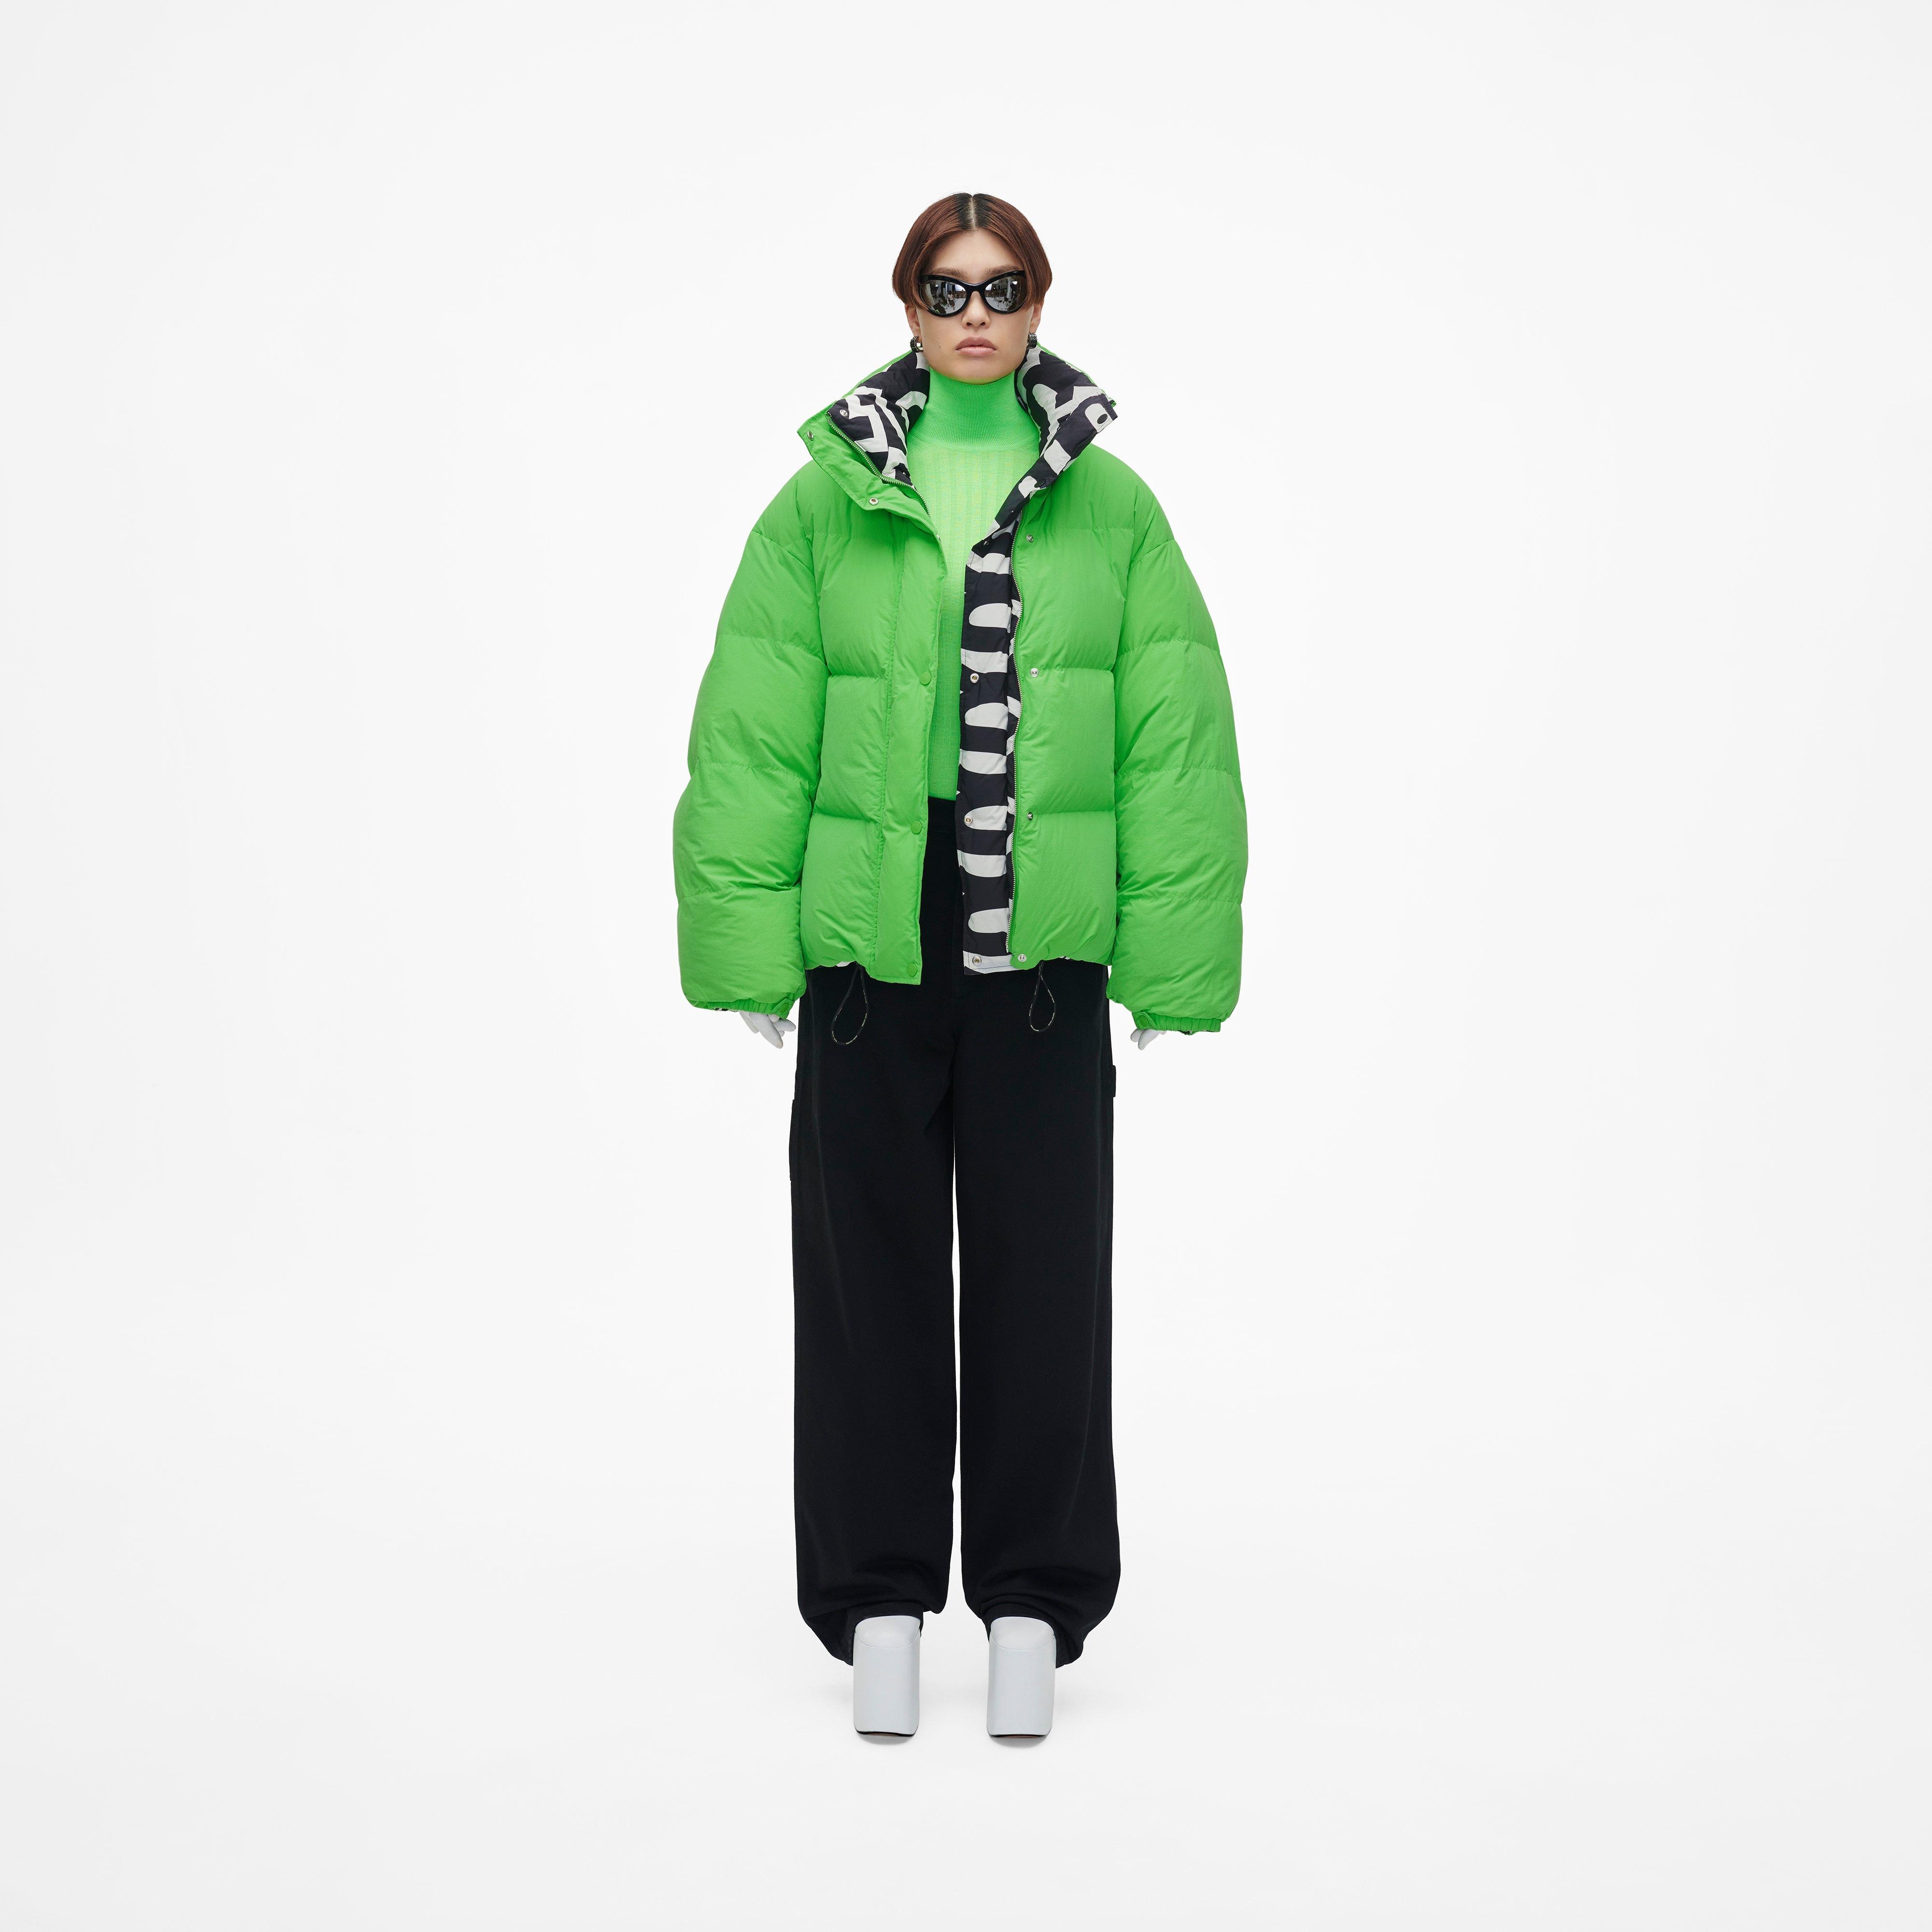 THE REVERSIBLE PUFFER - 2